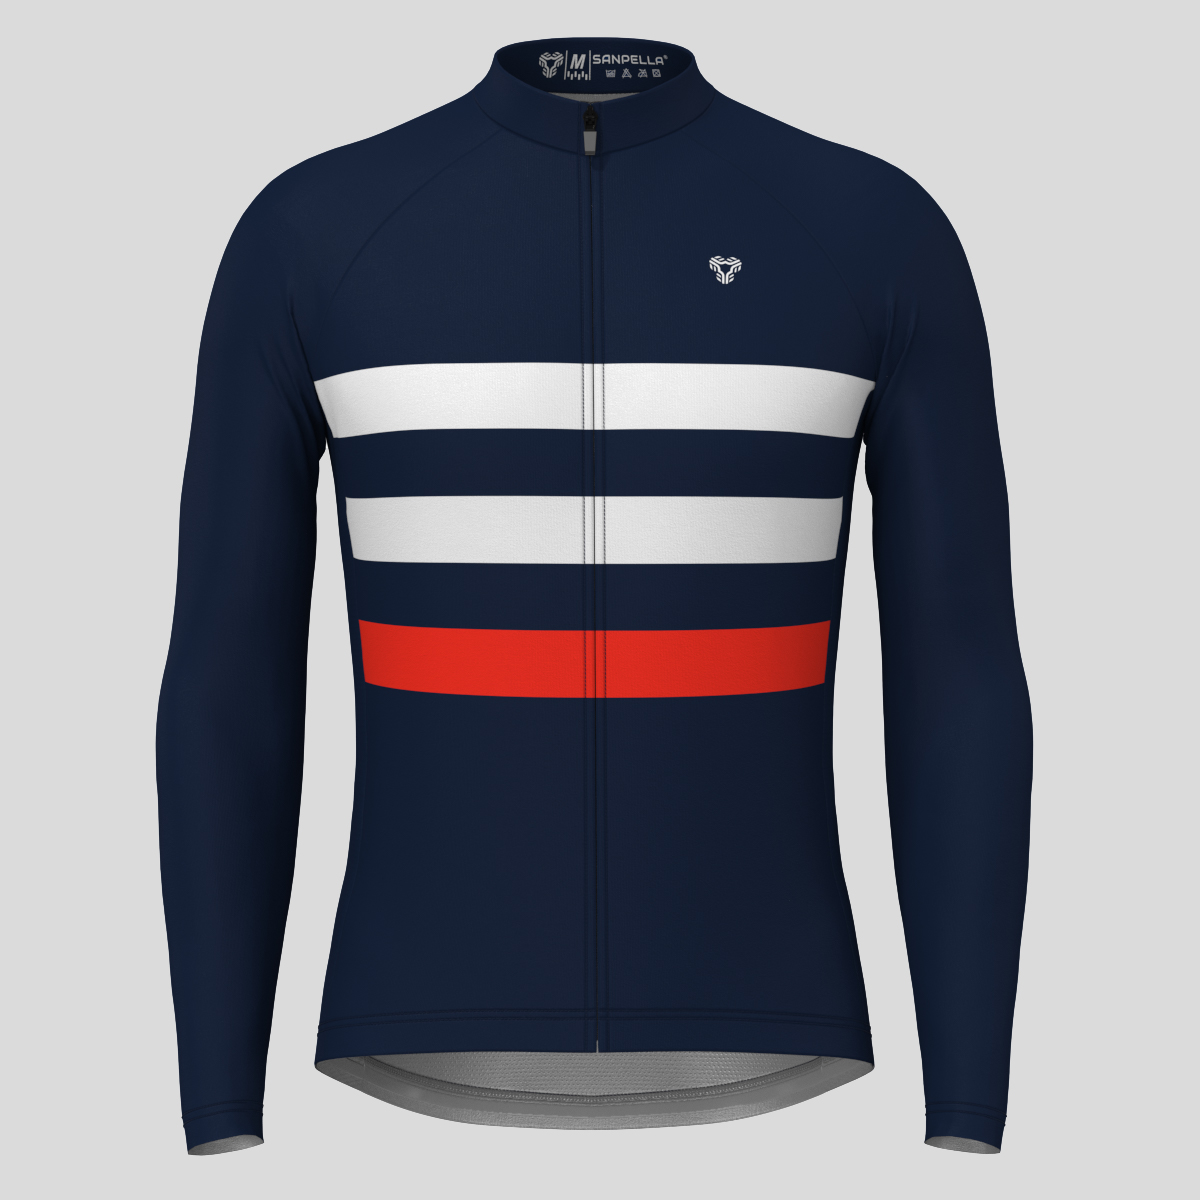 Men's Classic Stripes LS Cycling Jersey - Navy/White/Red